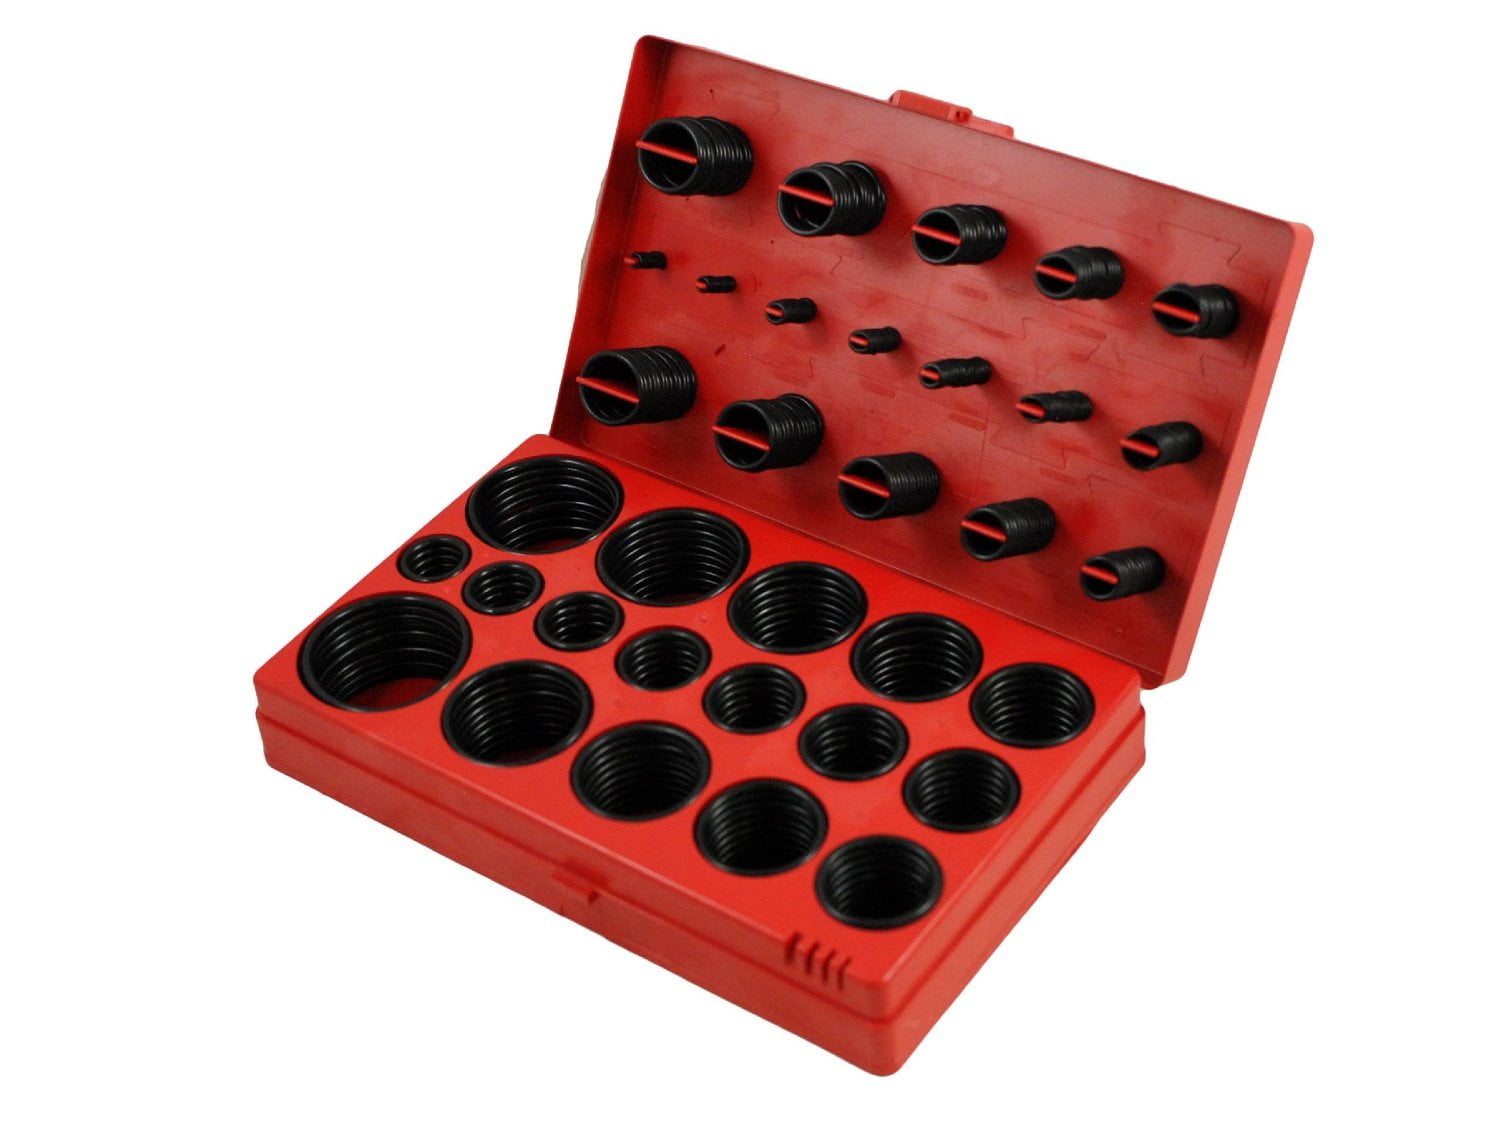 419 Black Automotive Metric O-Ring Seal Assortment Kit for Hydraulic Fittings 